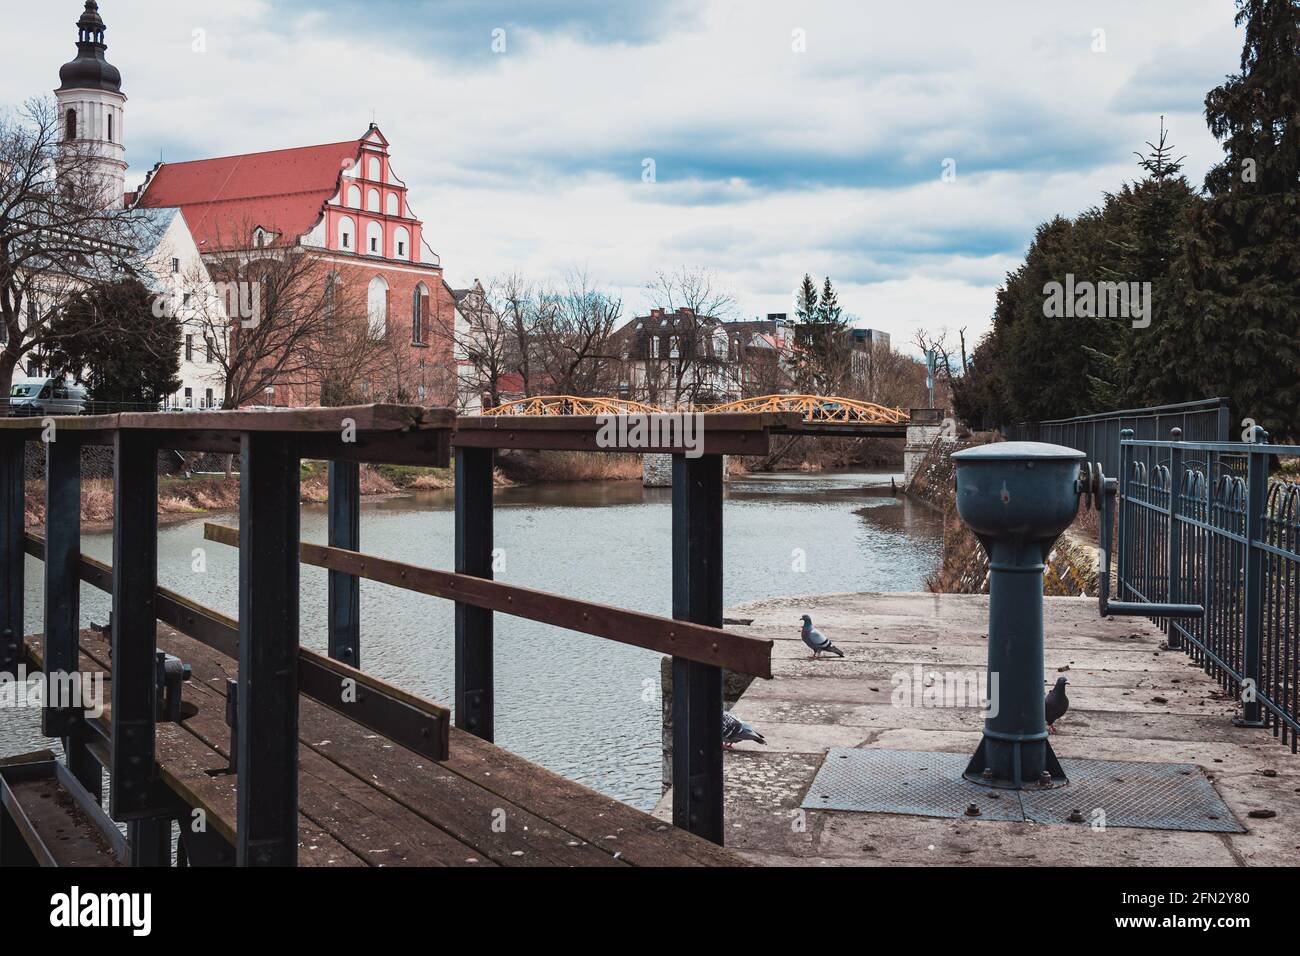 view of the water canal and surrounding buildings in Opole Stock Photo